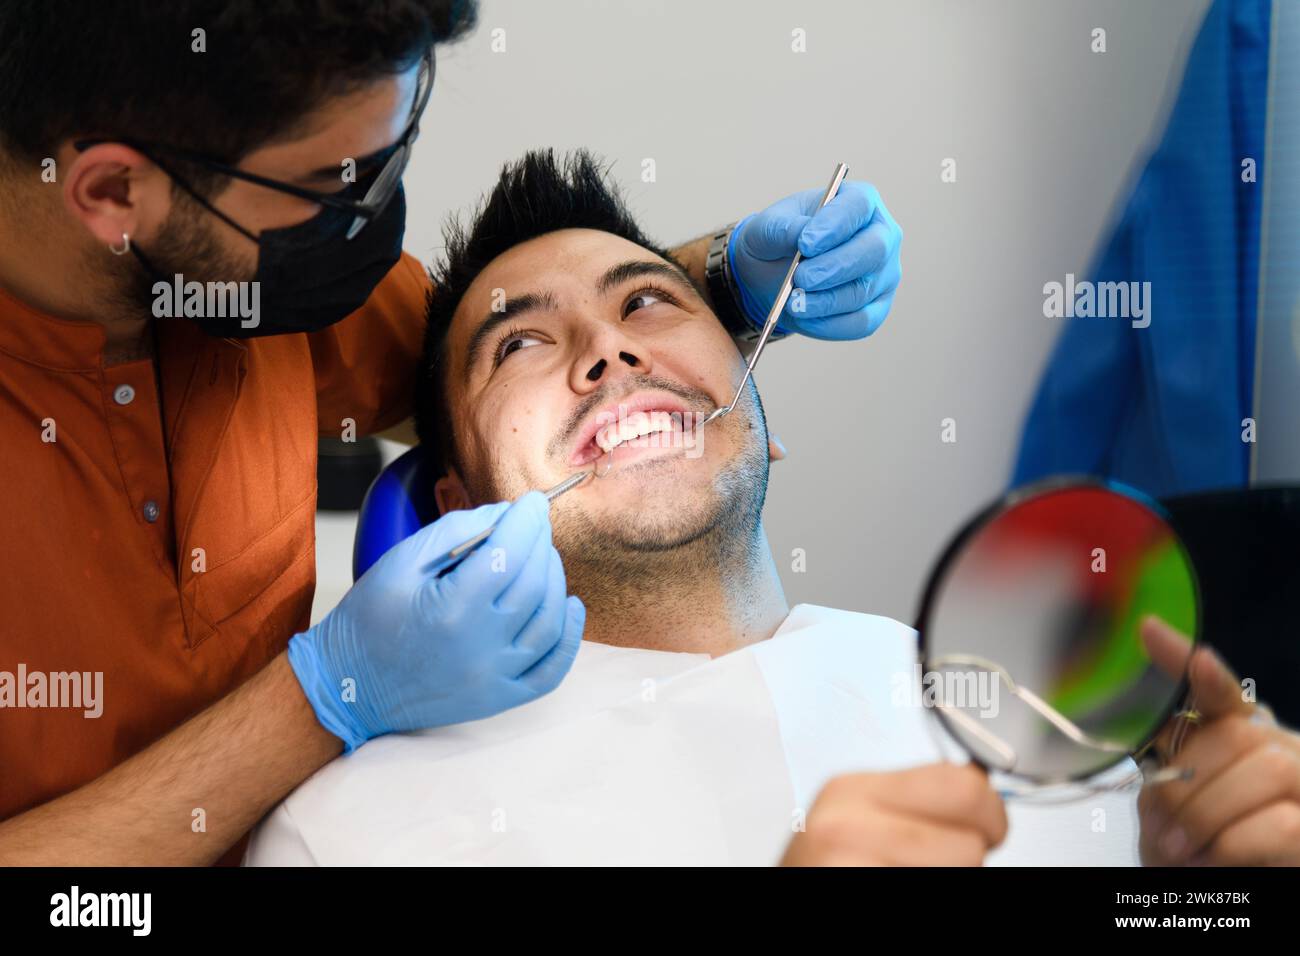 A patient shares a joyful moment with his dentist during an examination, showcasing a comfortable and friendly dental care environment Stock Photo